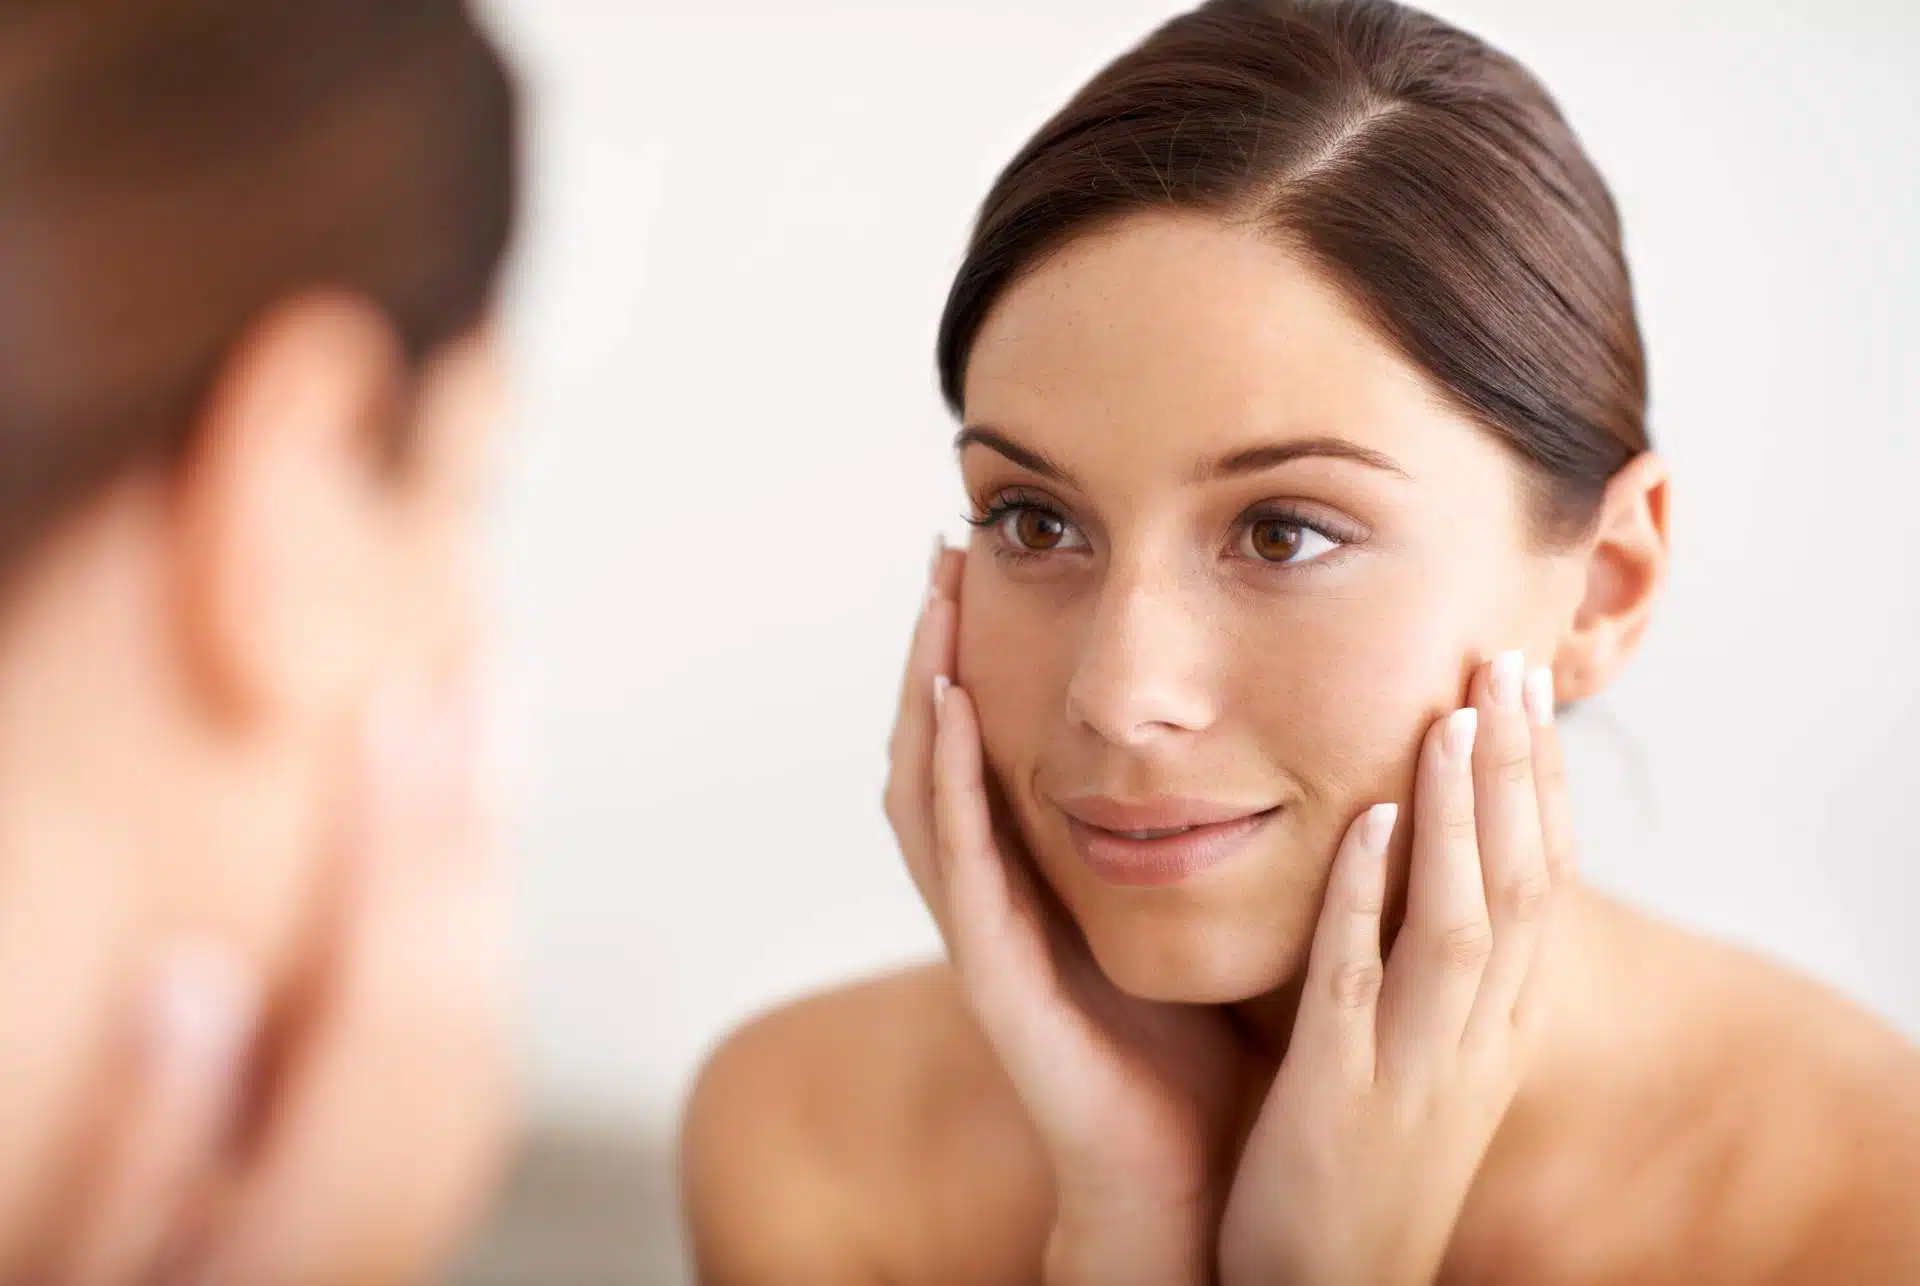 RF Microneedling: The Non-Invasive Solution for Tighter, Smoother Skin